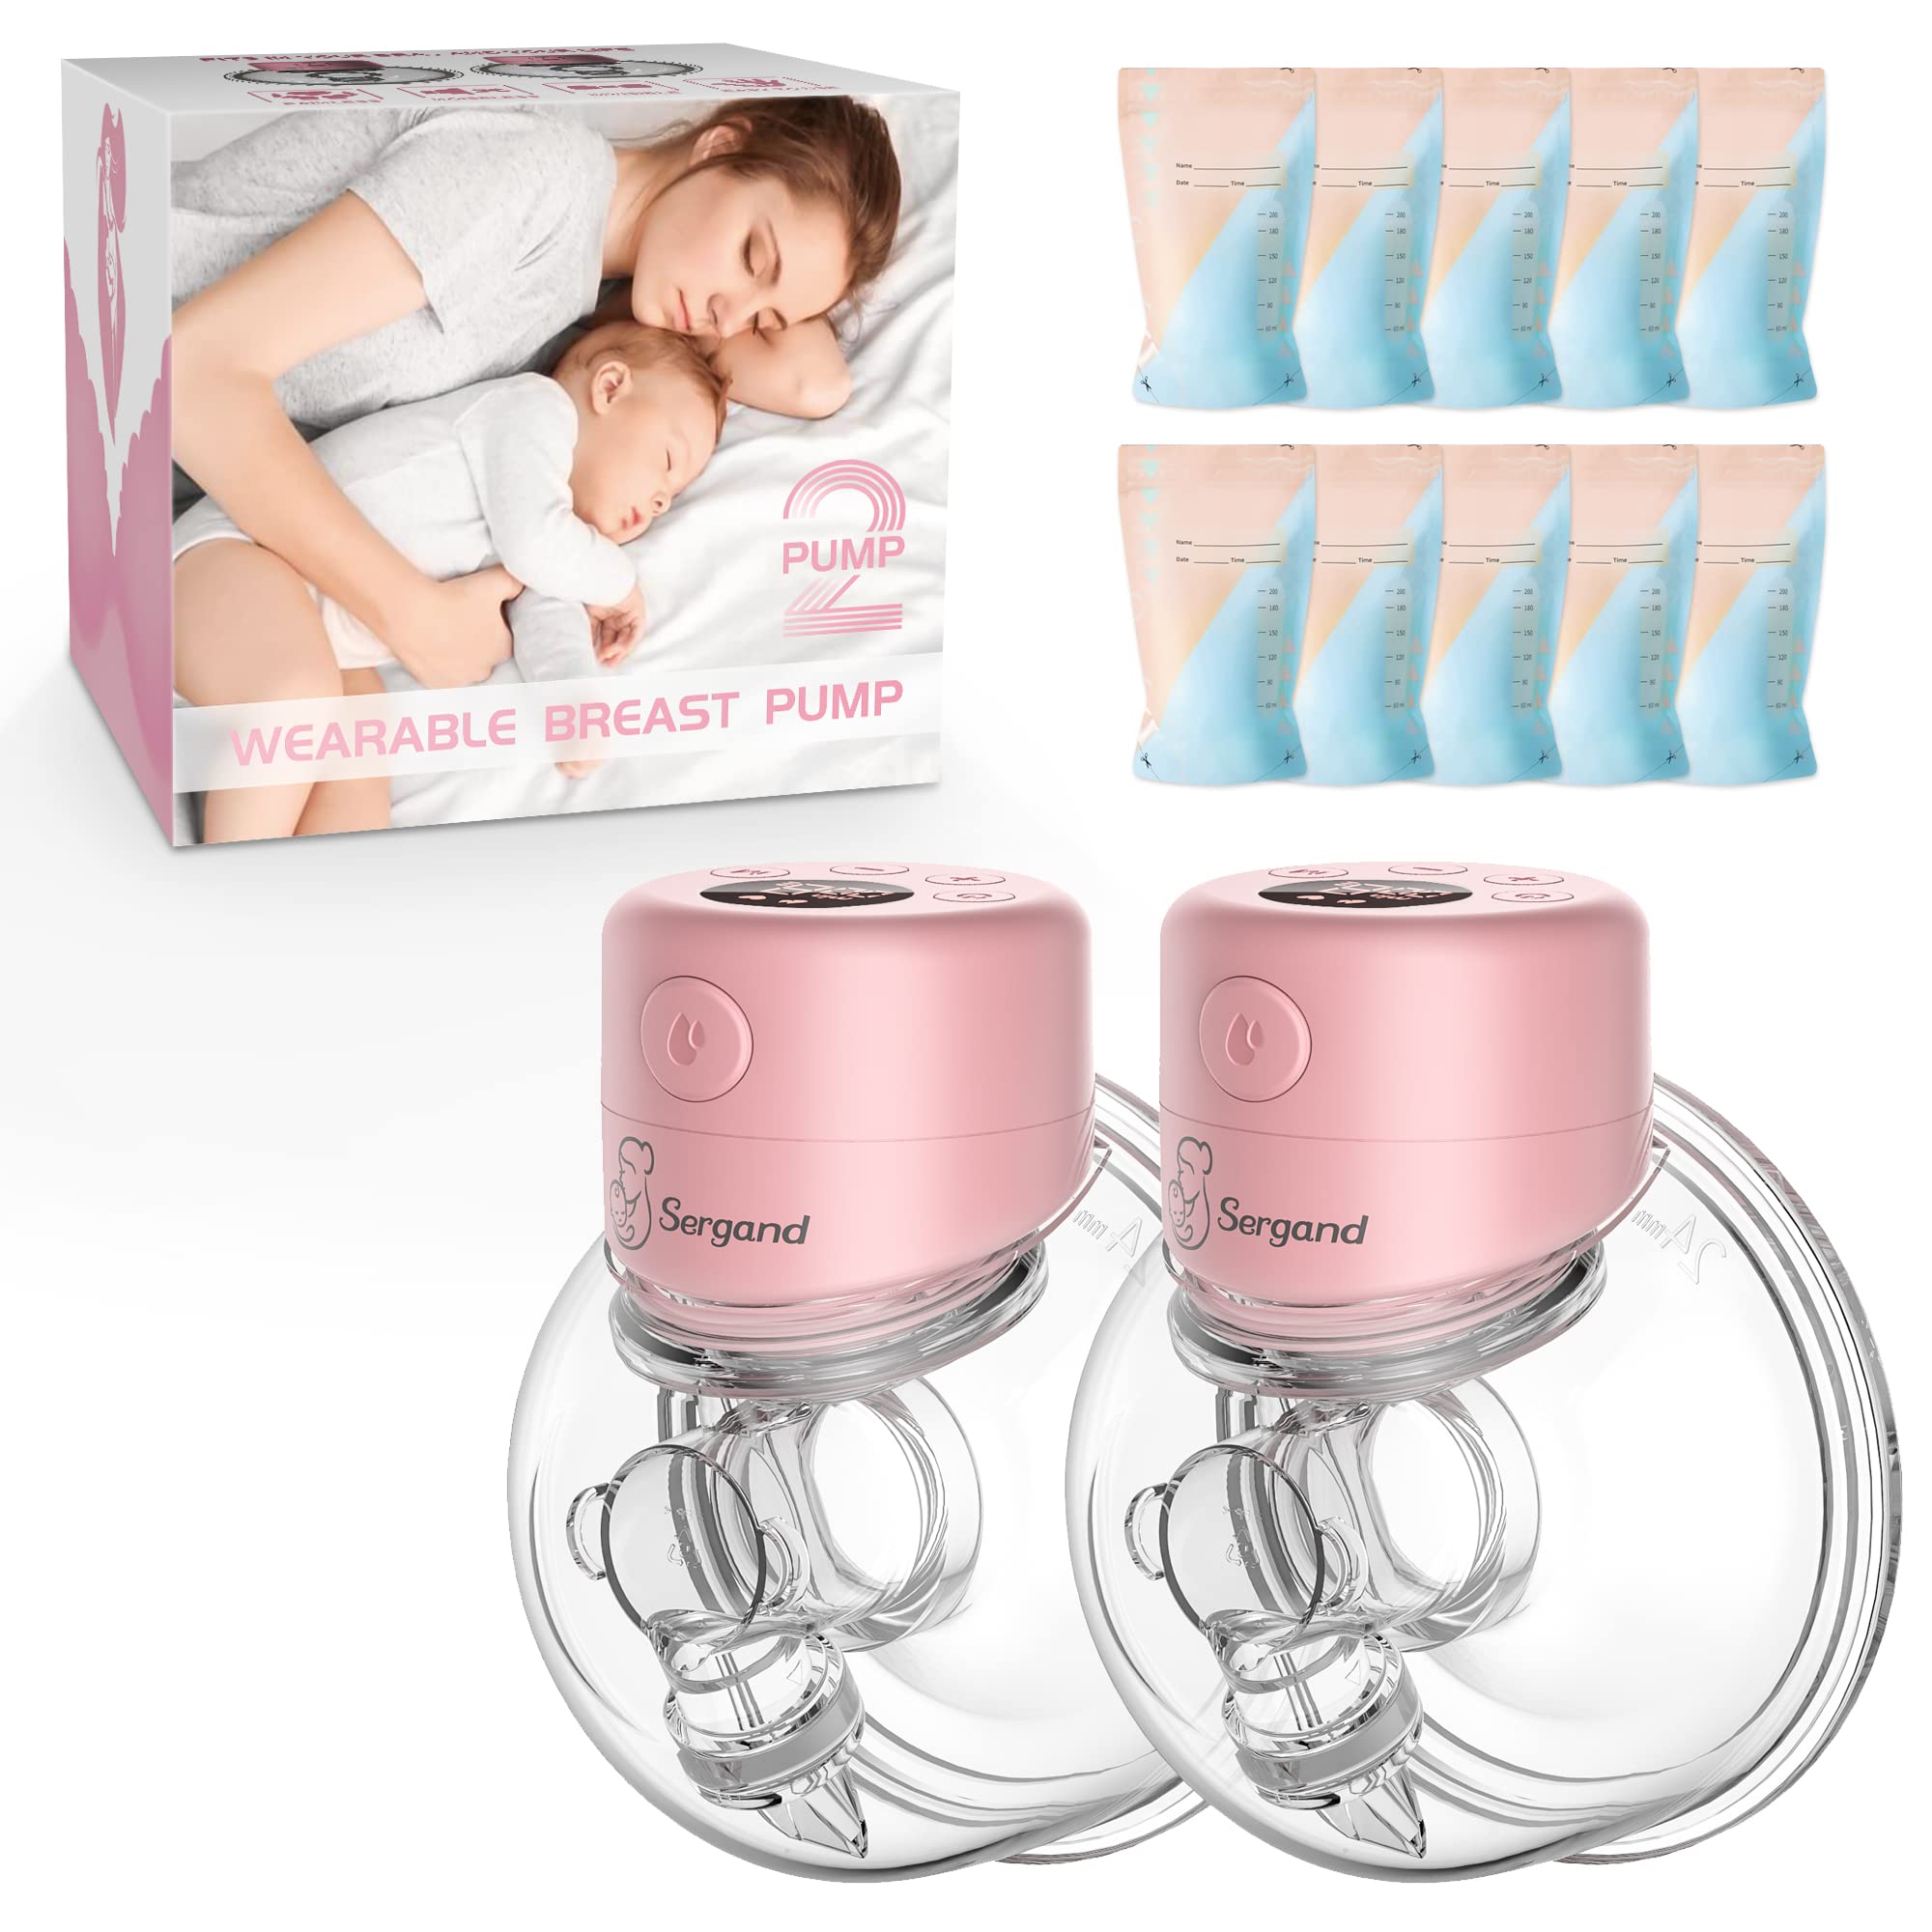 Wearable Breast Pump, 2 Modes & 9 Levels Electric Breast Pump Portable, Double Hands Free Breast Pump with 10 Pcs Milk Storage Bag, LCD Display, Low Noise & Painless, 24mm Flange, 2 Pack